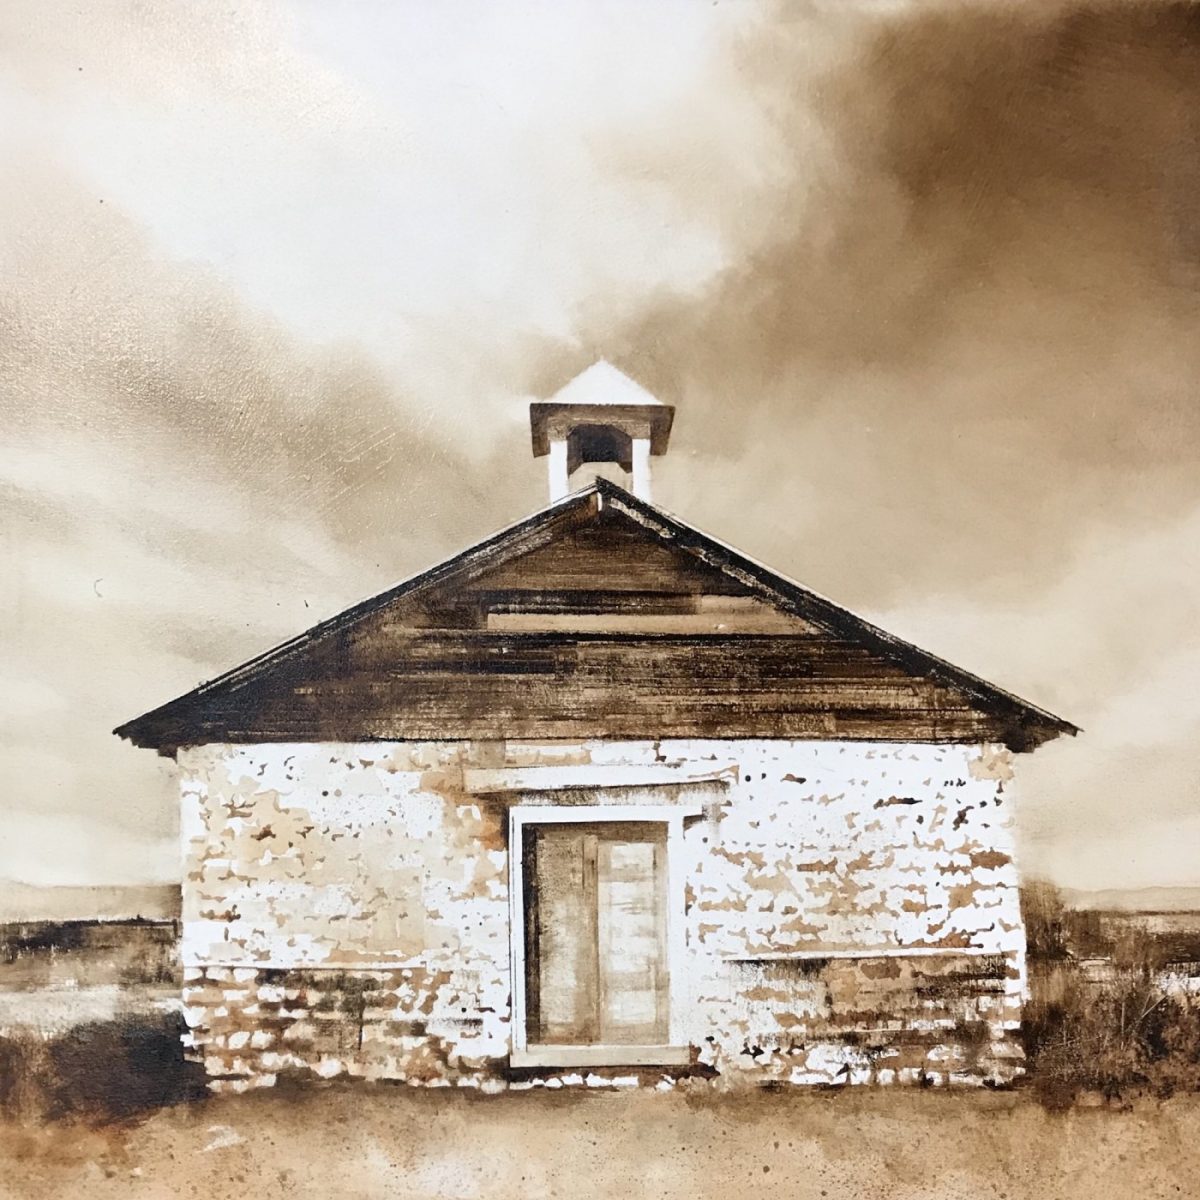 Oil painting of old church in New Mexico by Charlie Hunter